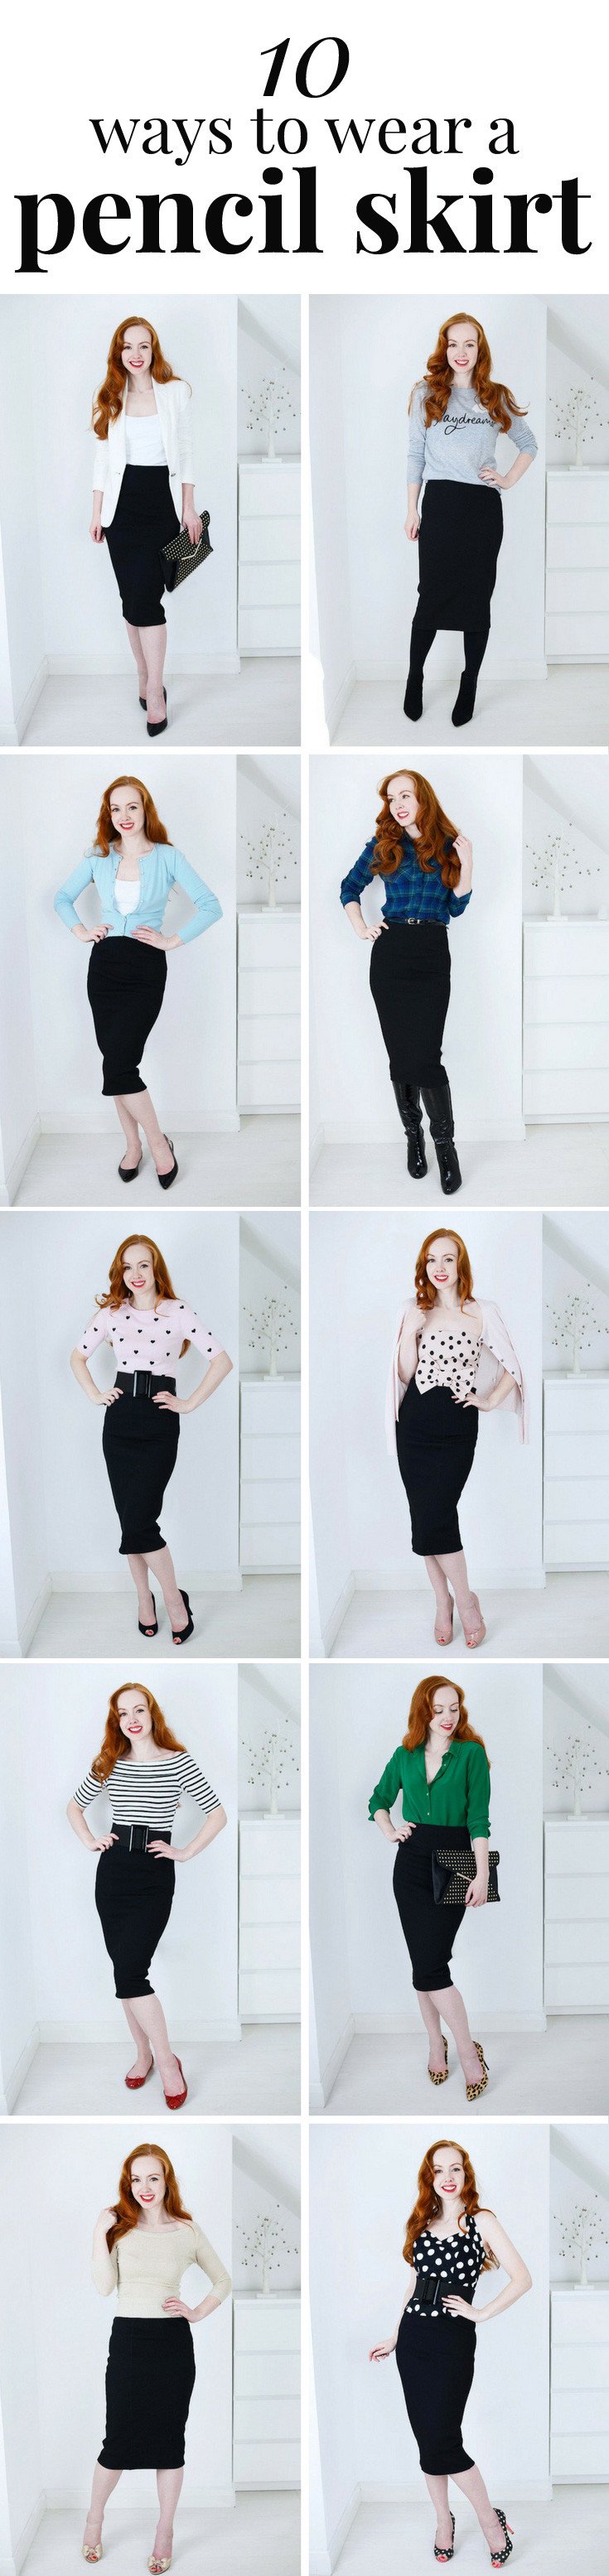 black pencil skirt casual outfit